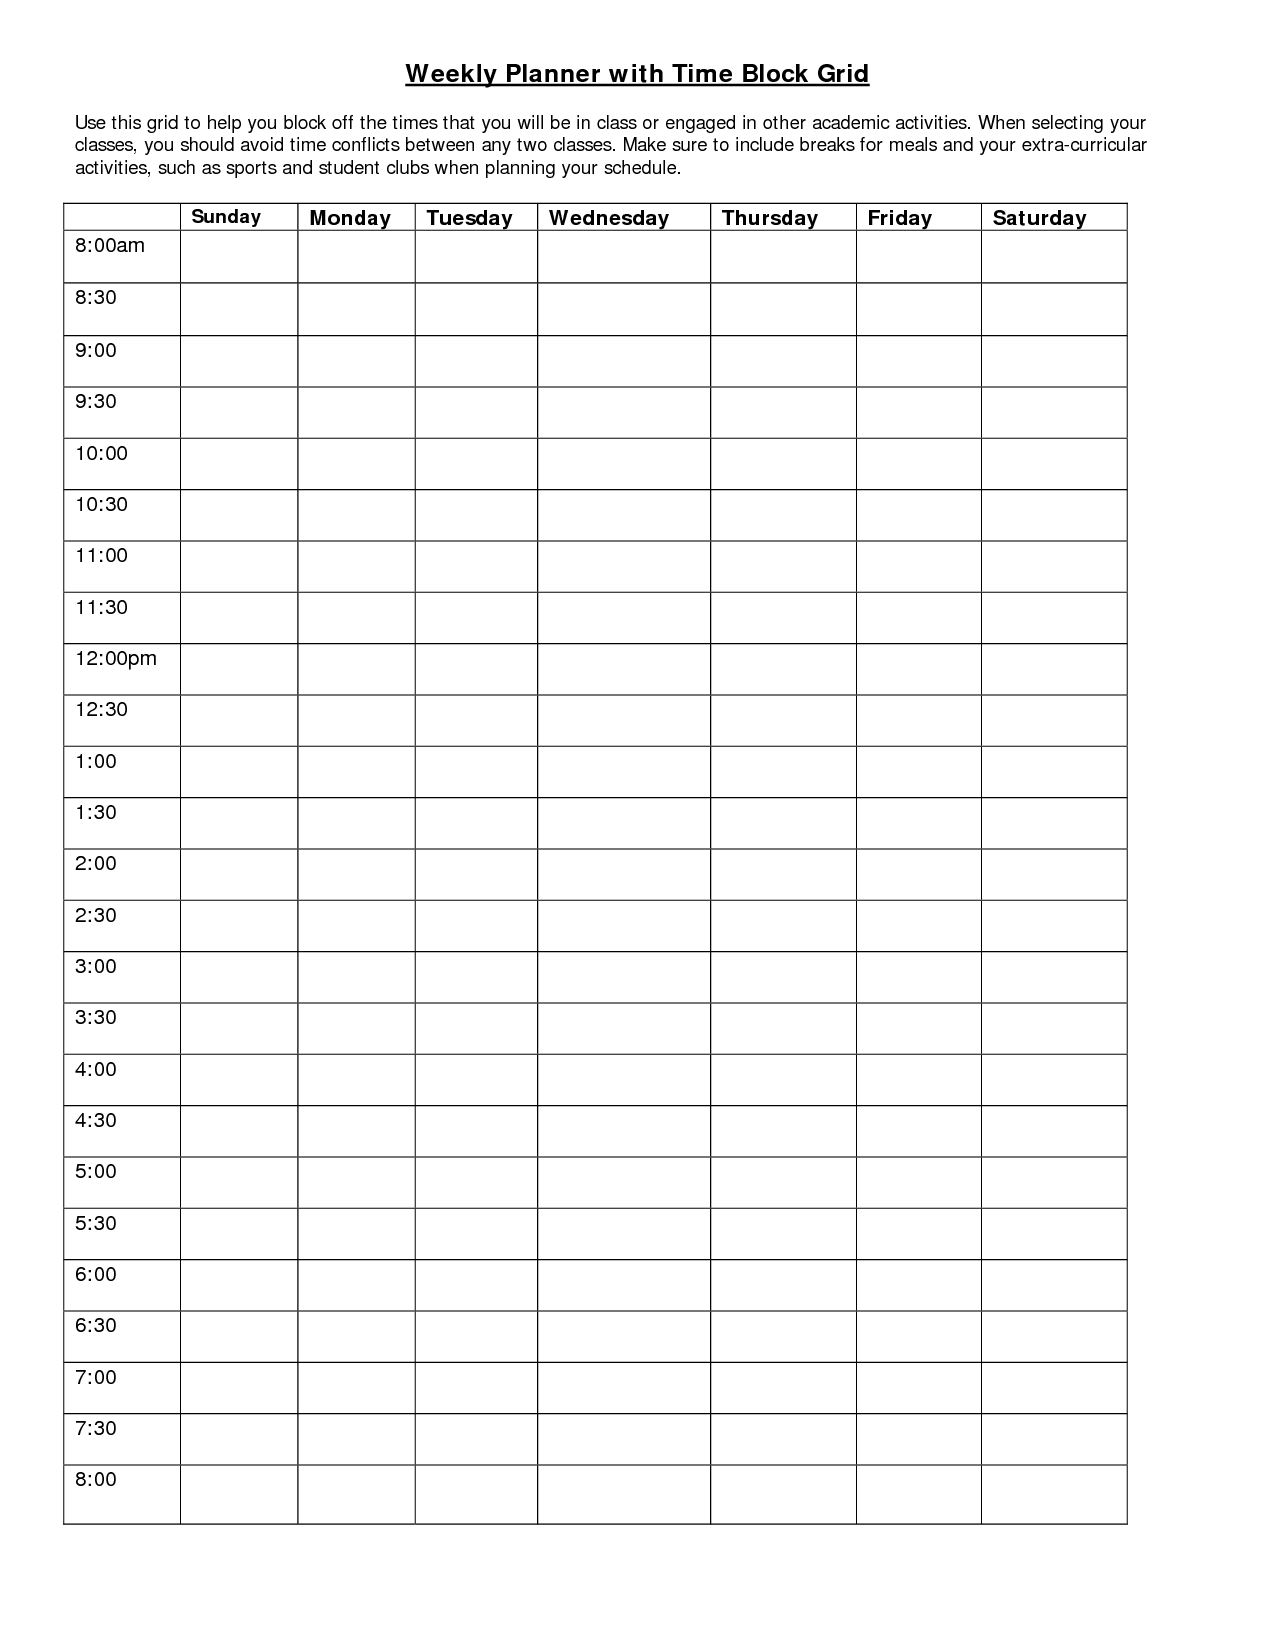 Weekly Planner With Time Block Grid | Good Ideas | Pinterest  Printable Weekly Planner With Times